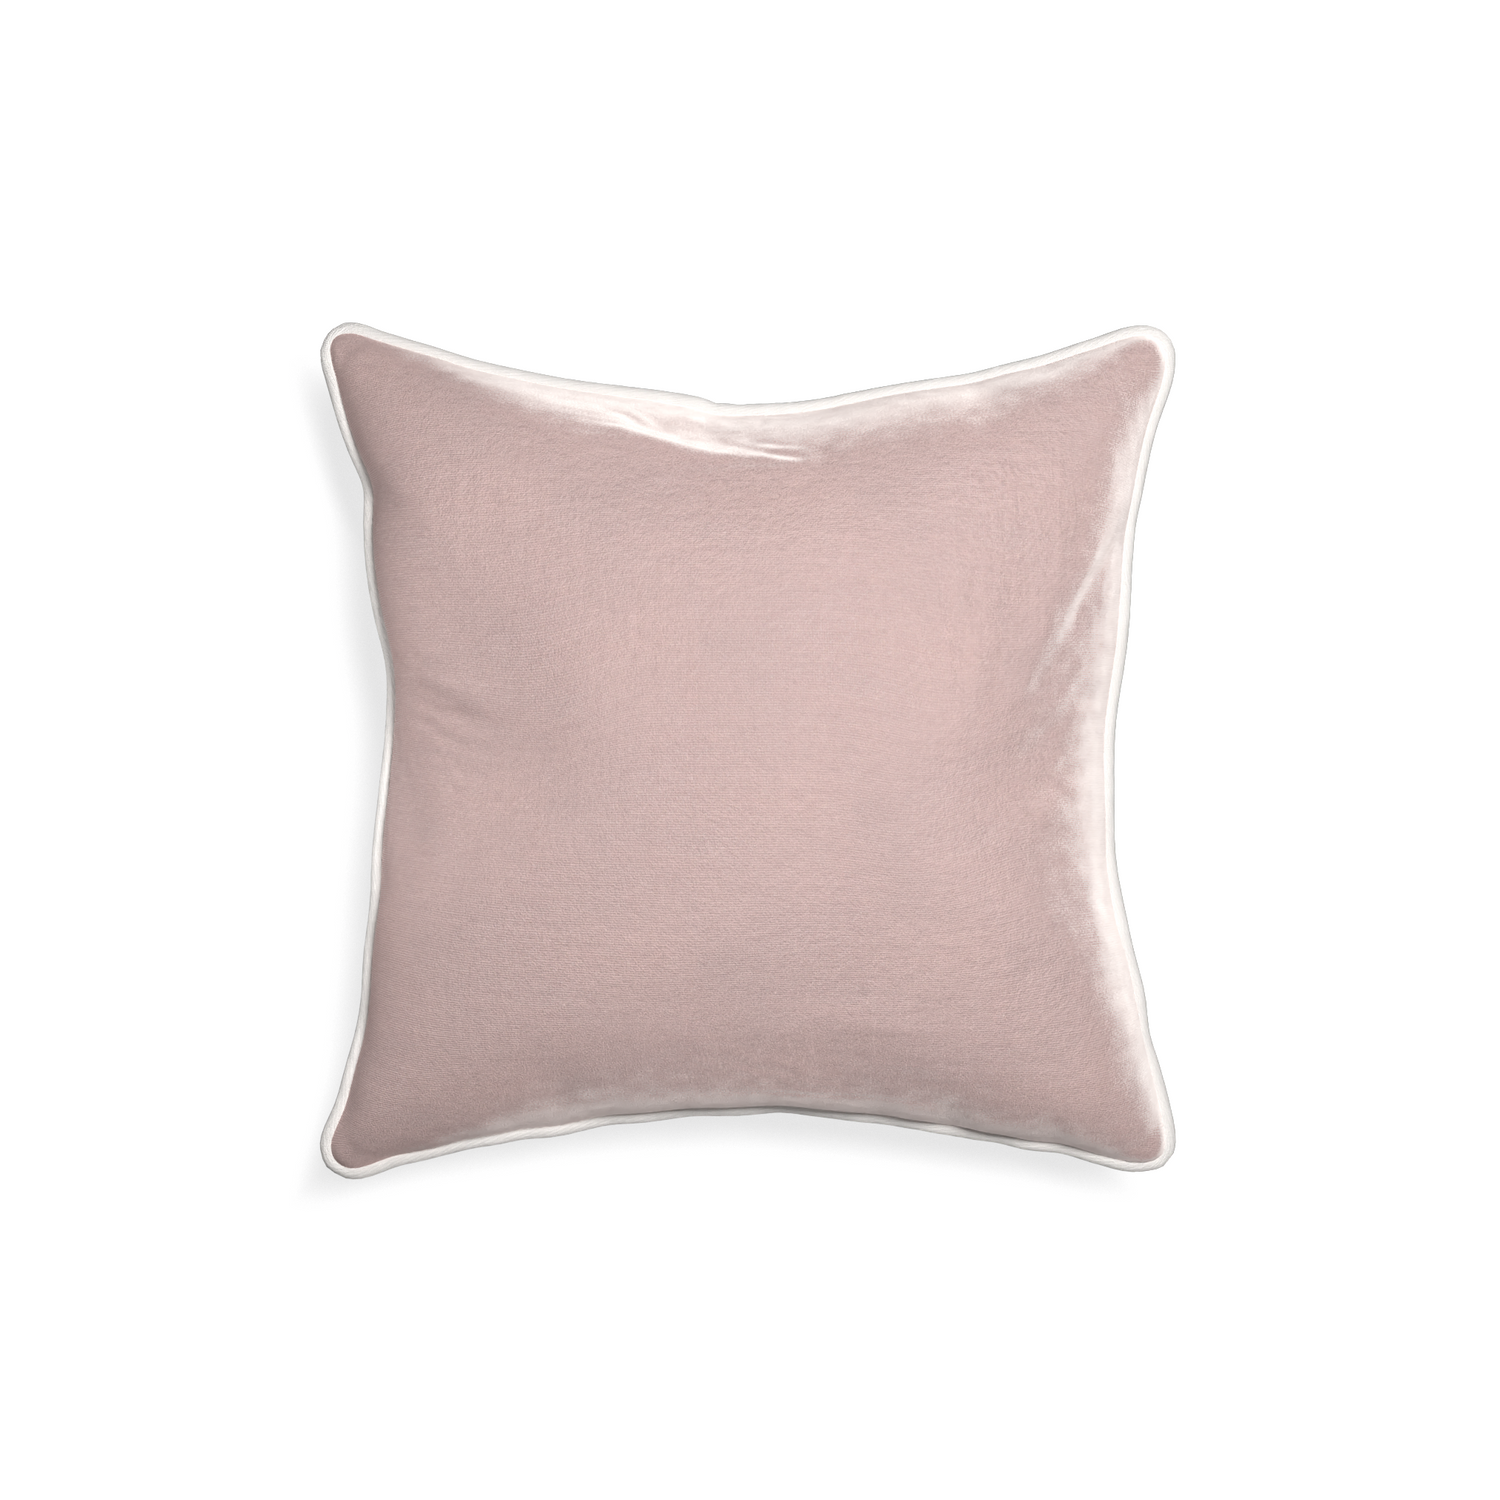 square light pink velvet pillow with white piping 